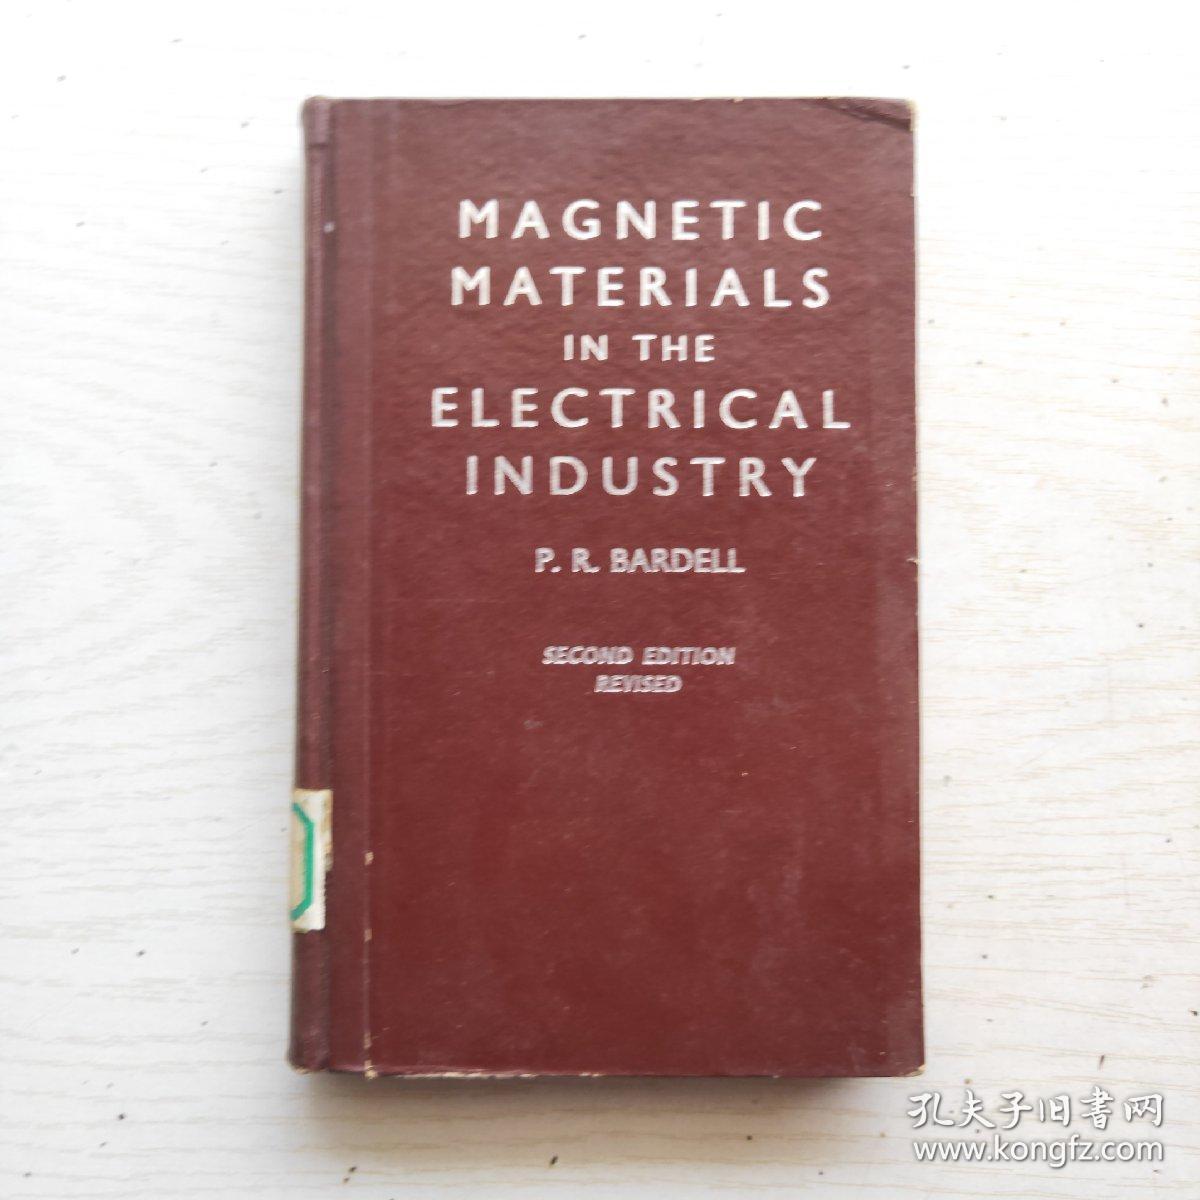 Magnetic materials in the electrical industry 电气工业中的磁性材料（英文）